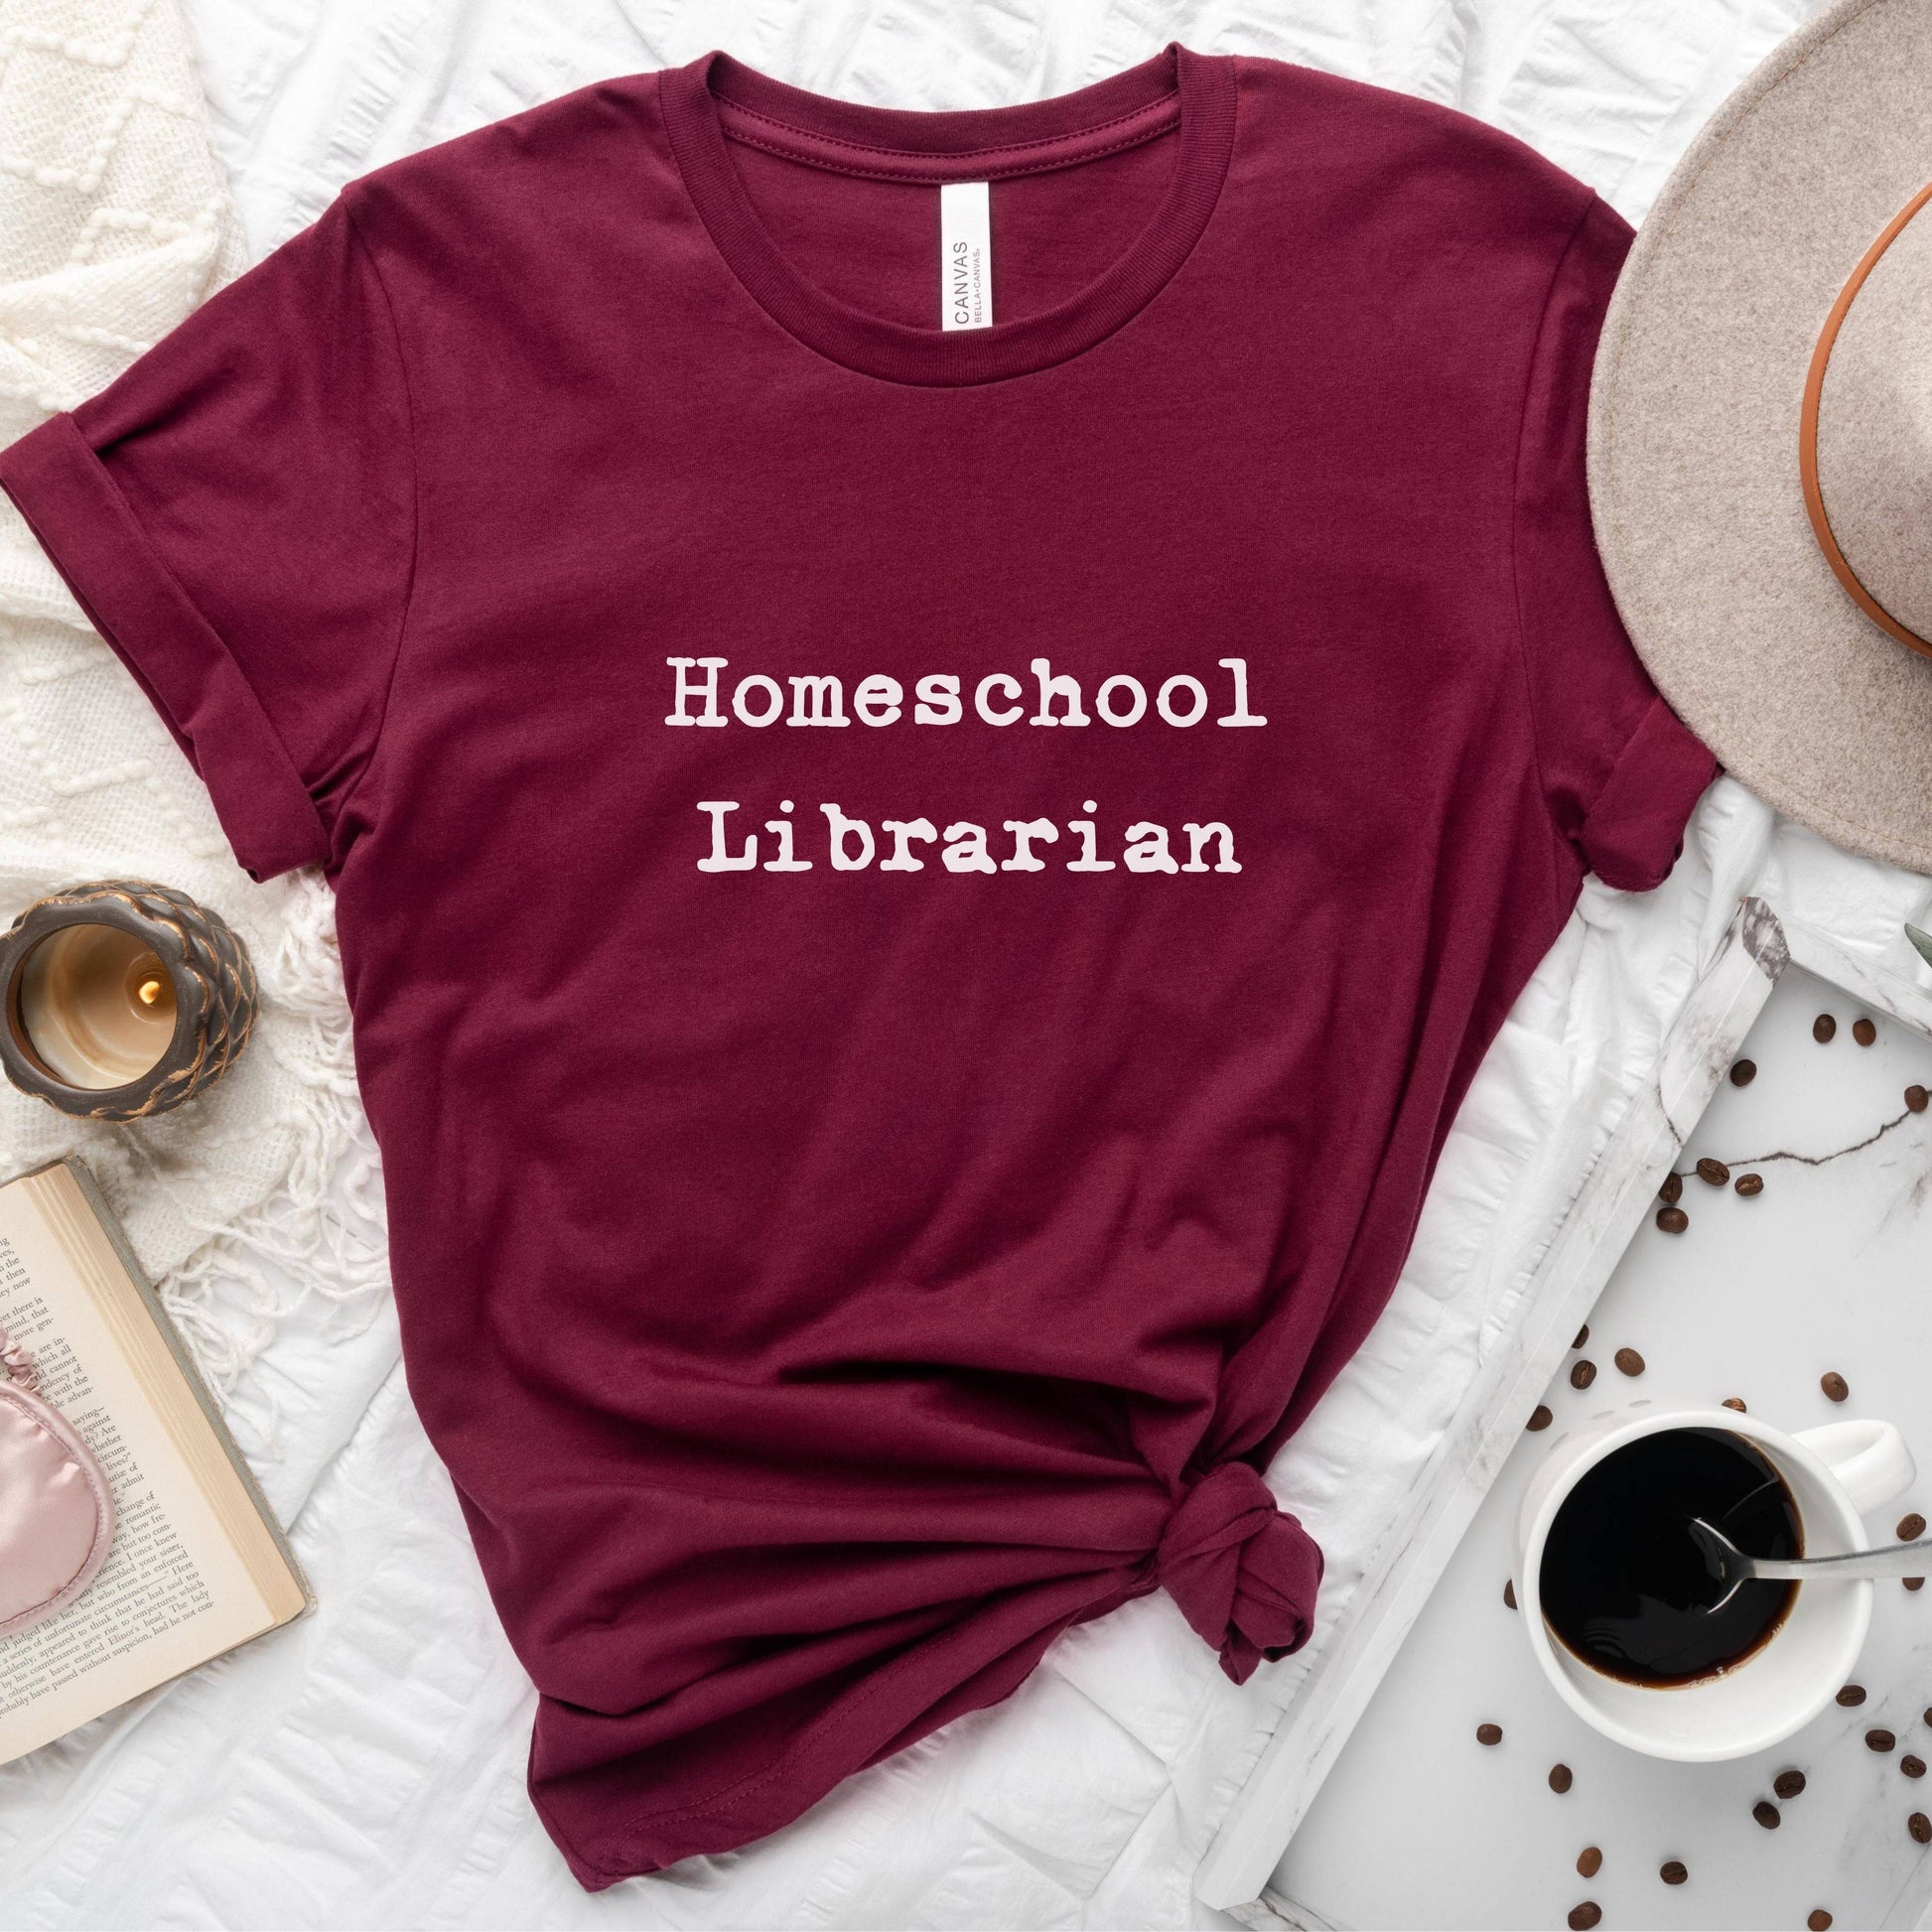 homeschool librarian shirt in maroon red for book loving homeschooling moms